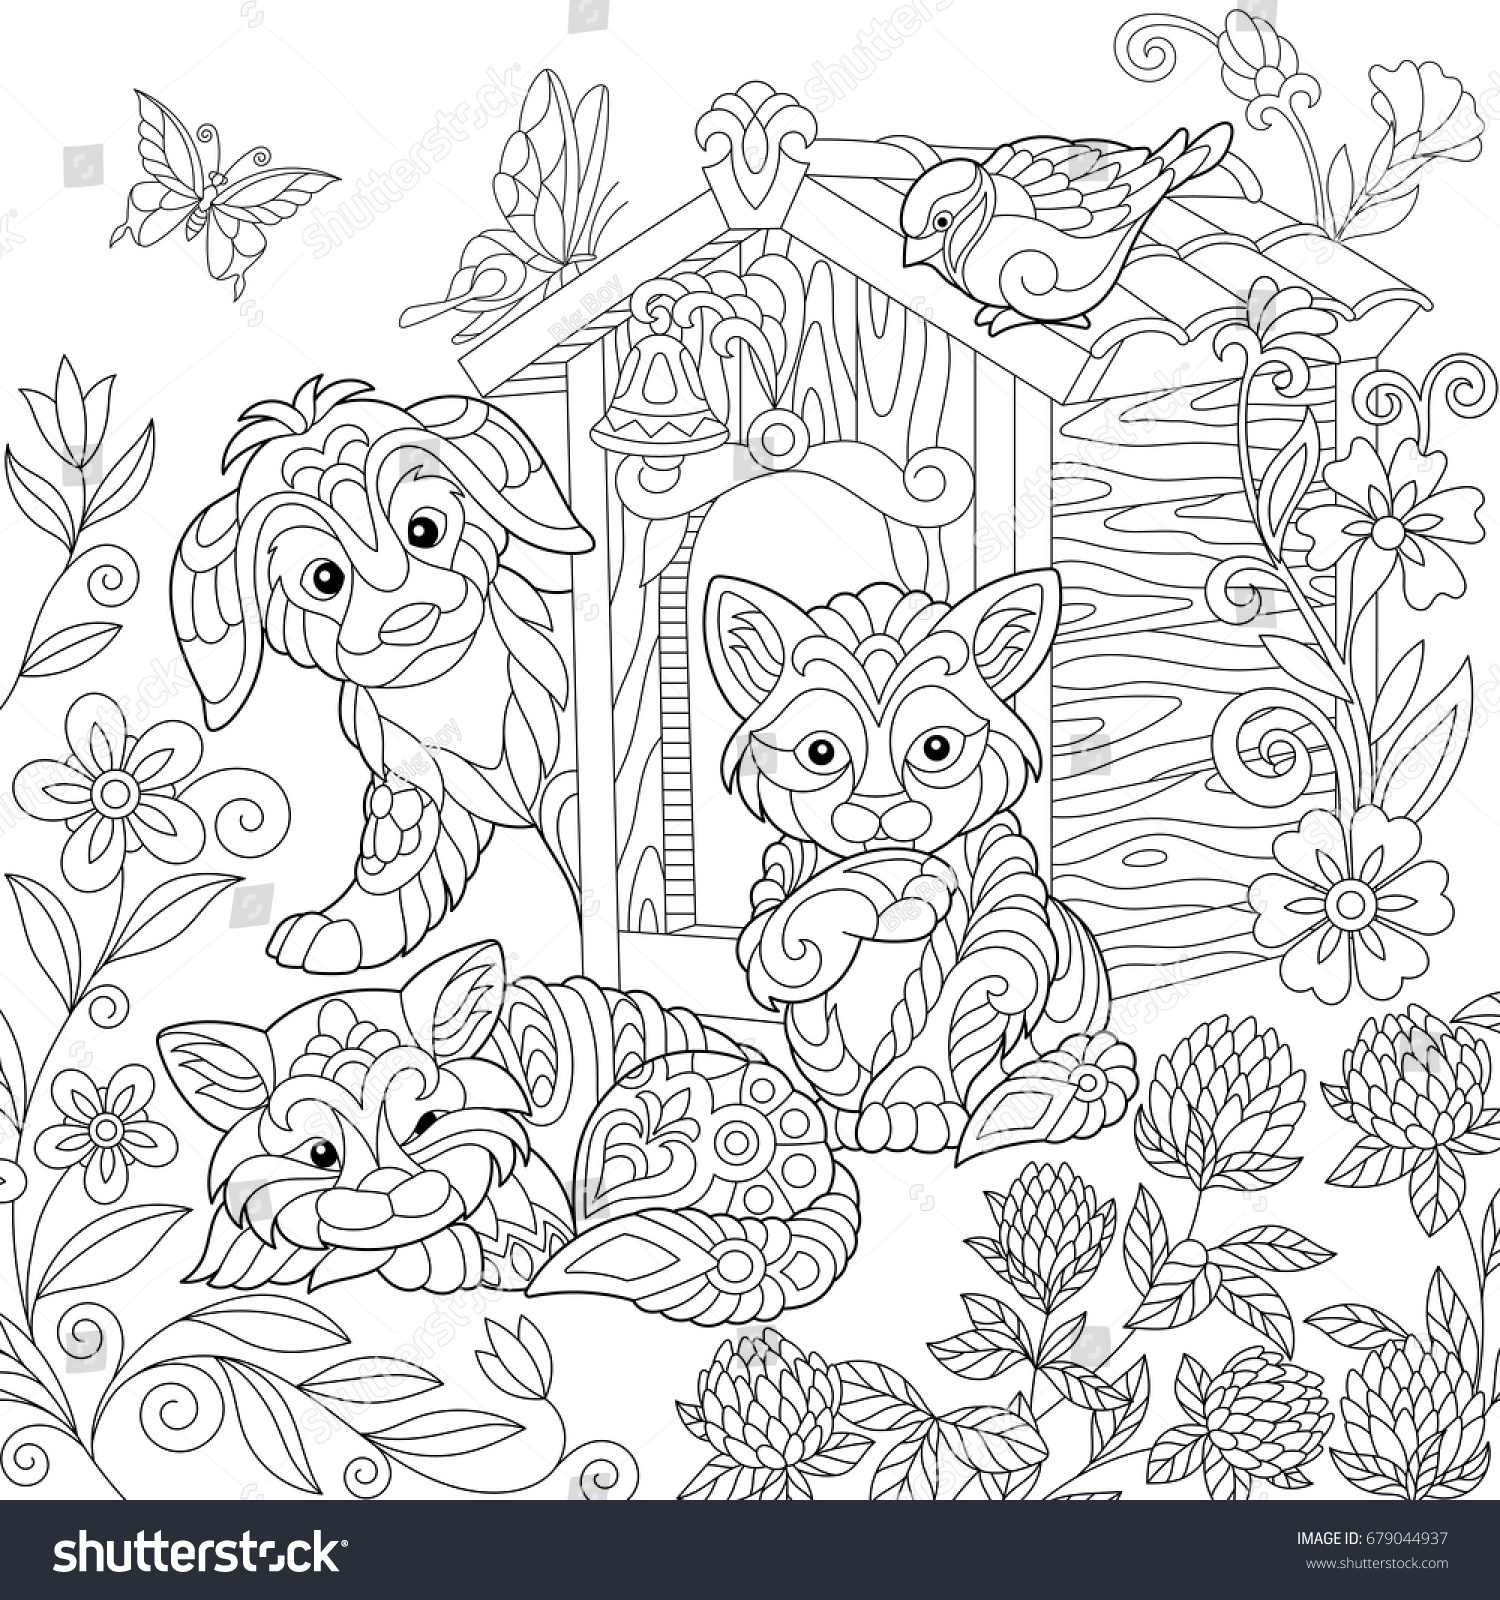 Download Coloring Page Puppy Cat Sparrow Bird Stock Vector ...